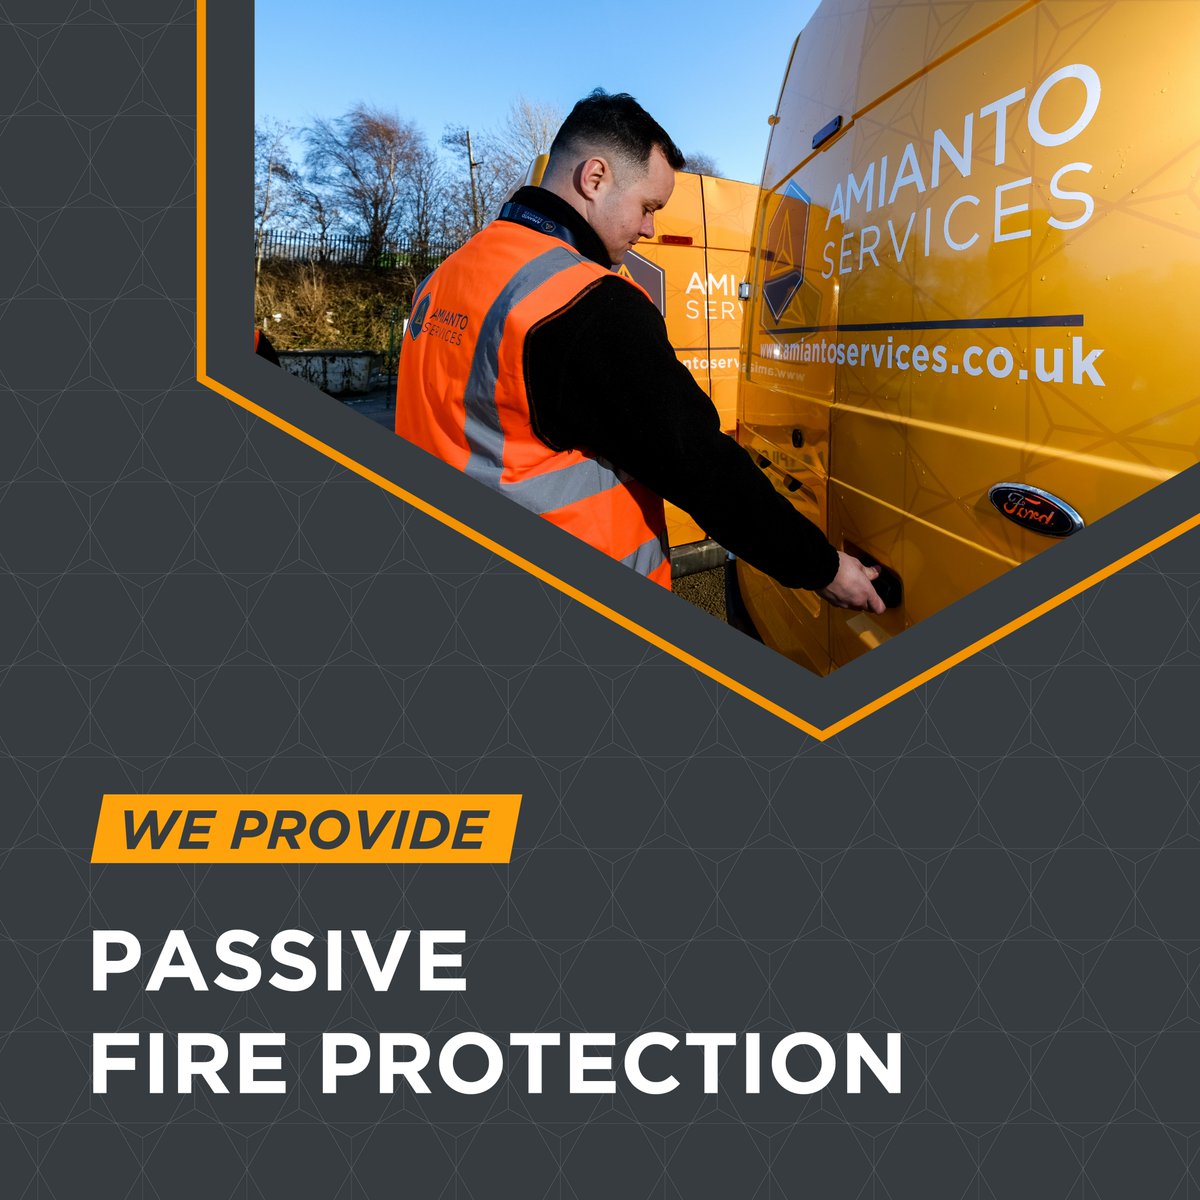 We are FIRAS accredited! 🔥

#PassiveFireProtection consists of solutions which have been installed into the building framework to better resist the effects of fire.

For more information, contact us on info@amiantoservices.co.uk, 0151 529 7111, or visit amiantoservices.co.uk.